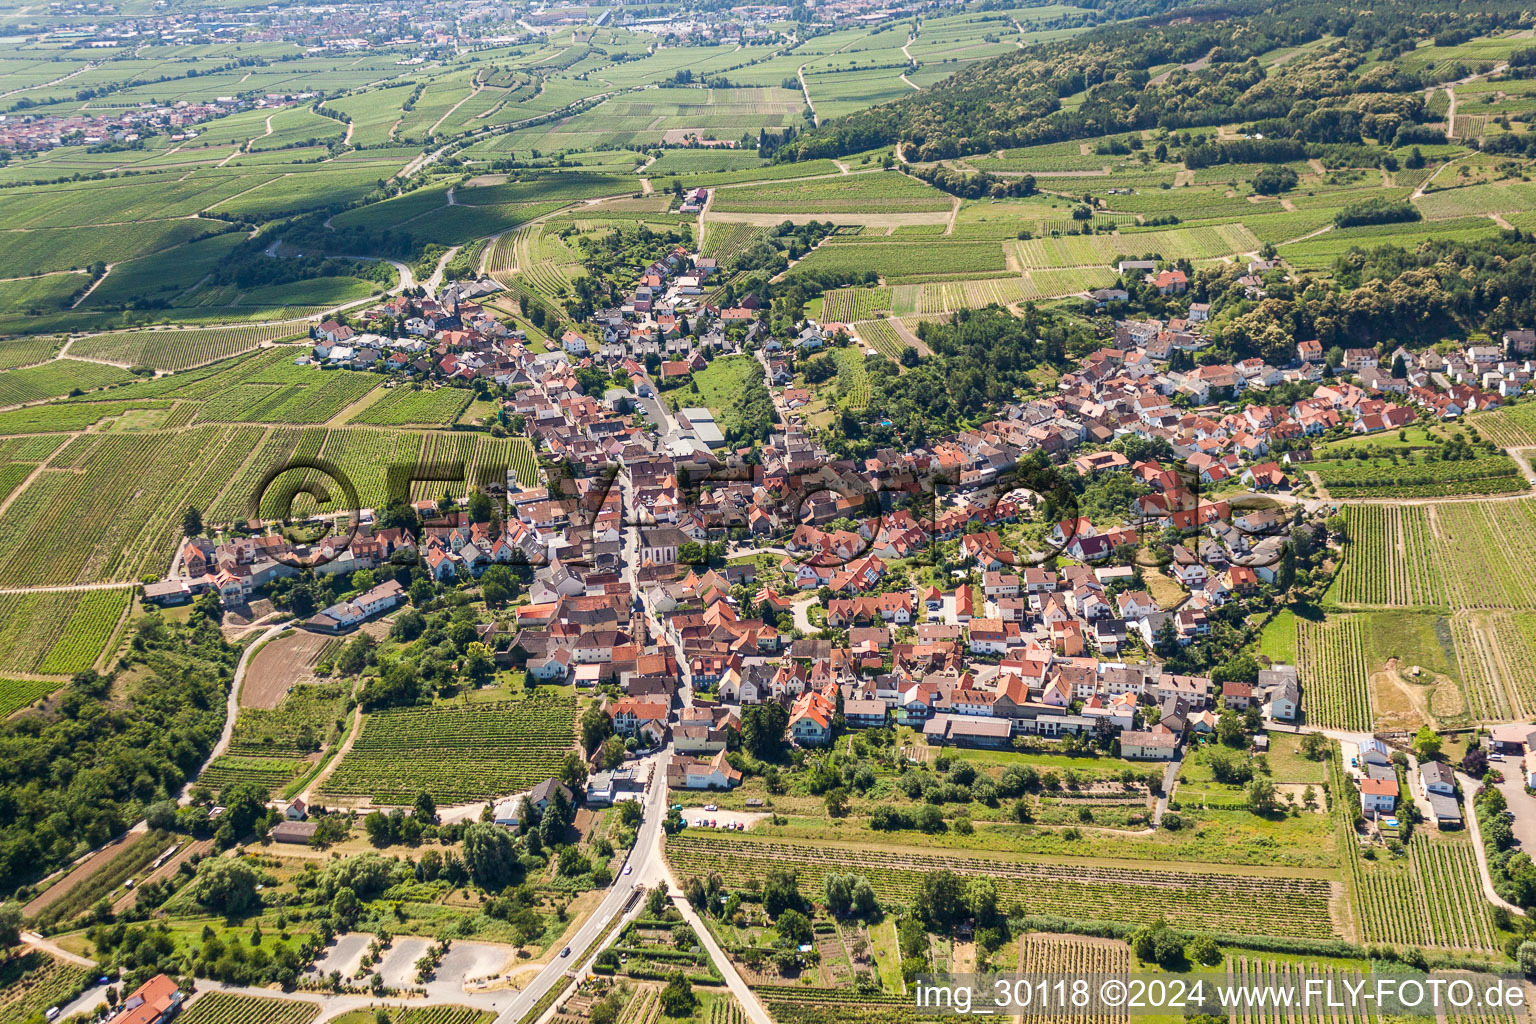 Aerial view of Village - view on the edge of agricultural fields and farmland in Leistadt in the state Rhineland-Palatinate, Germany